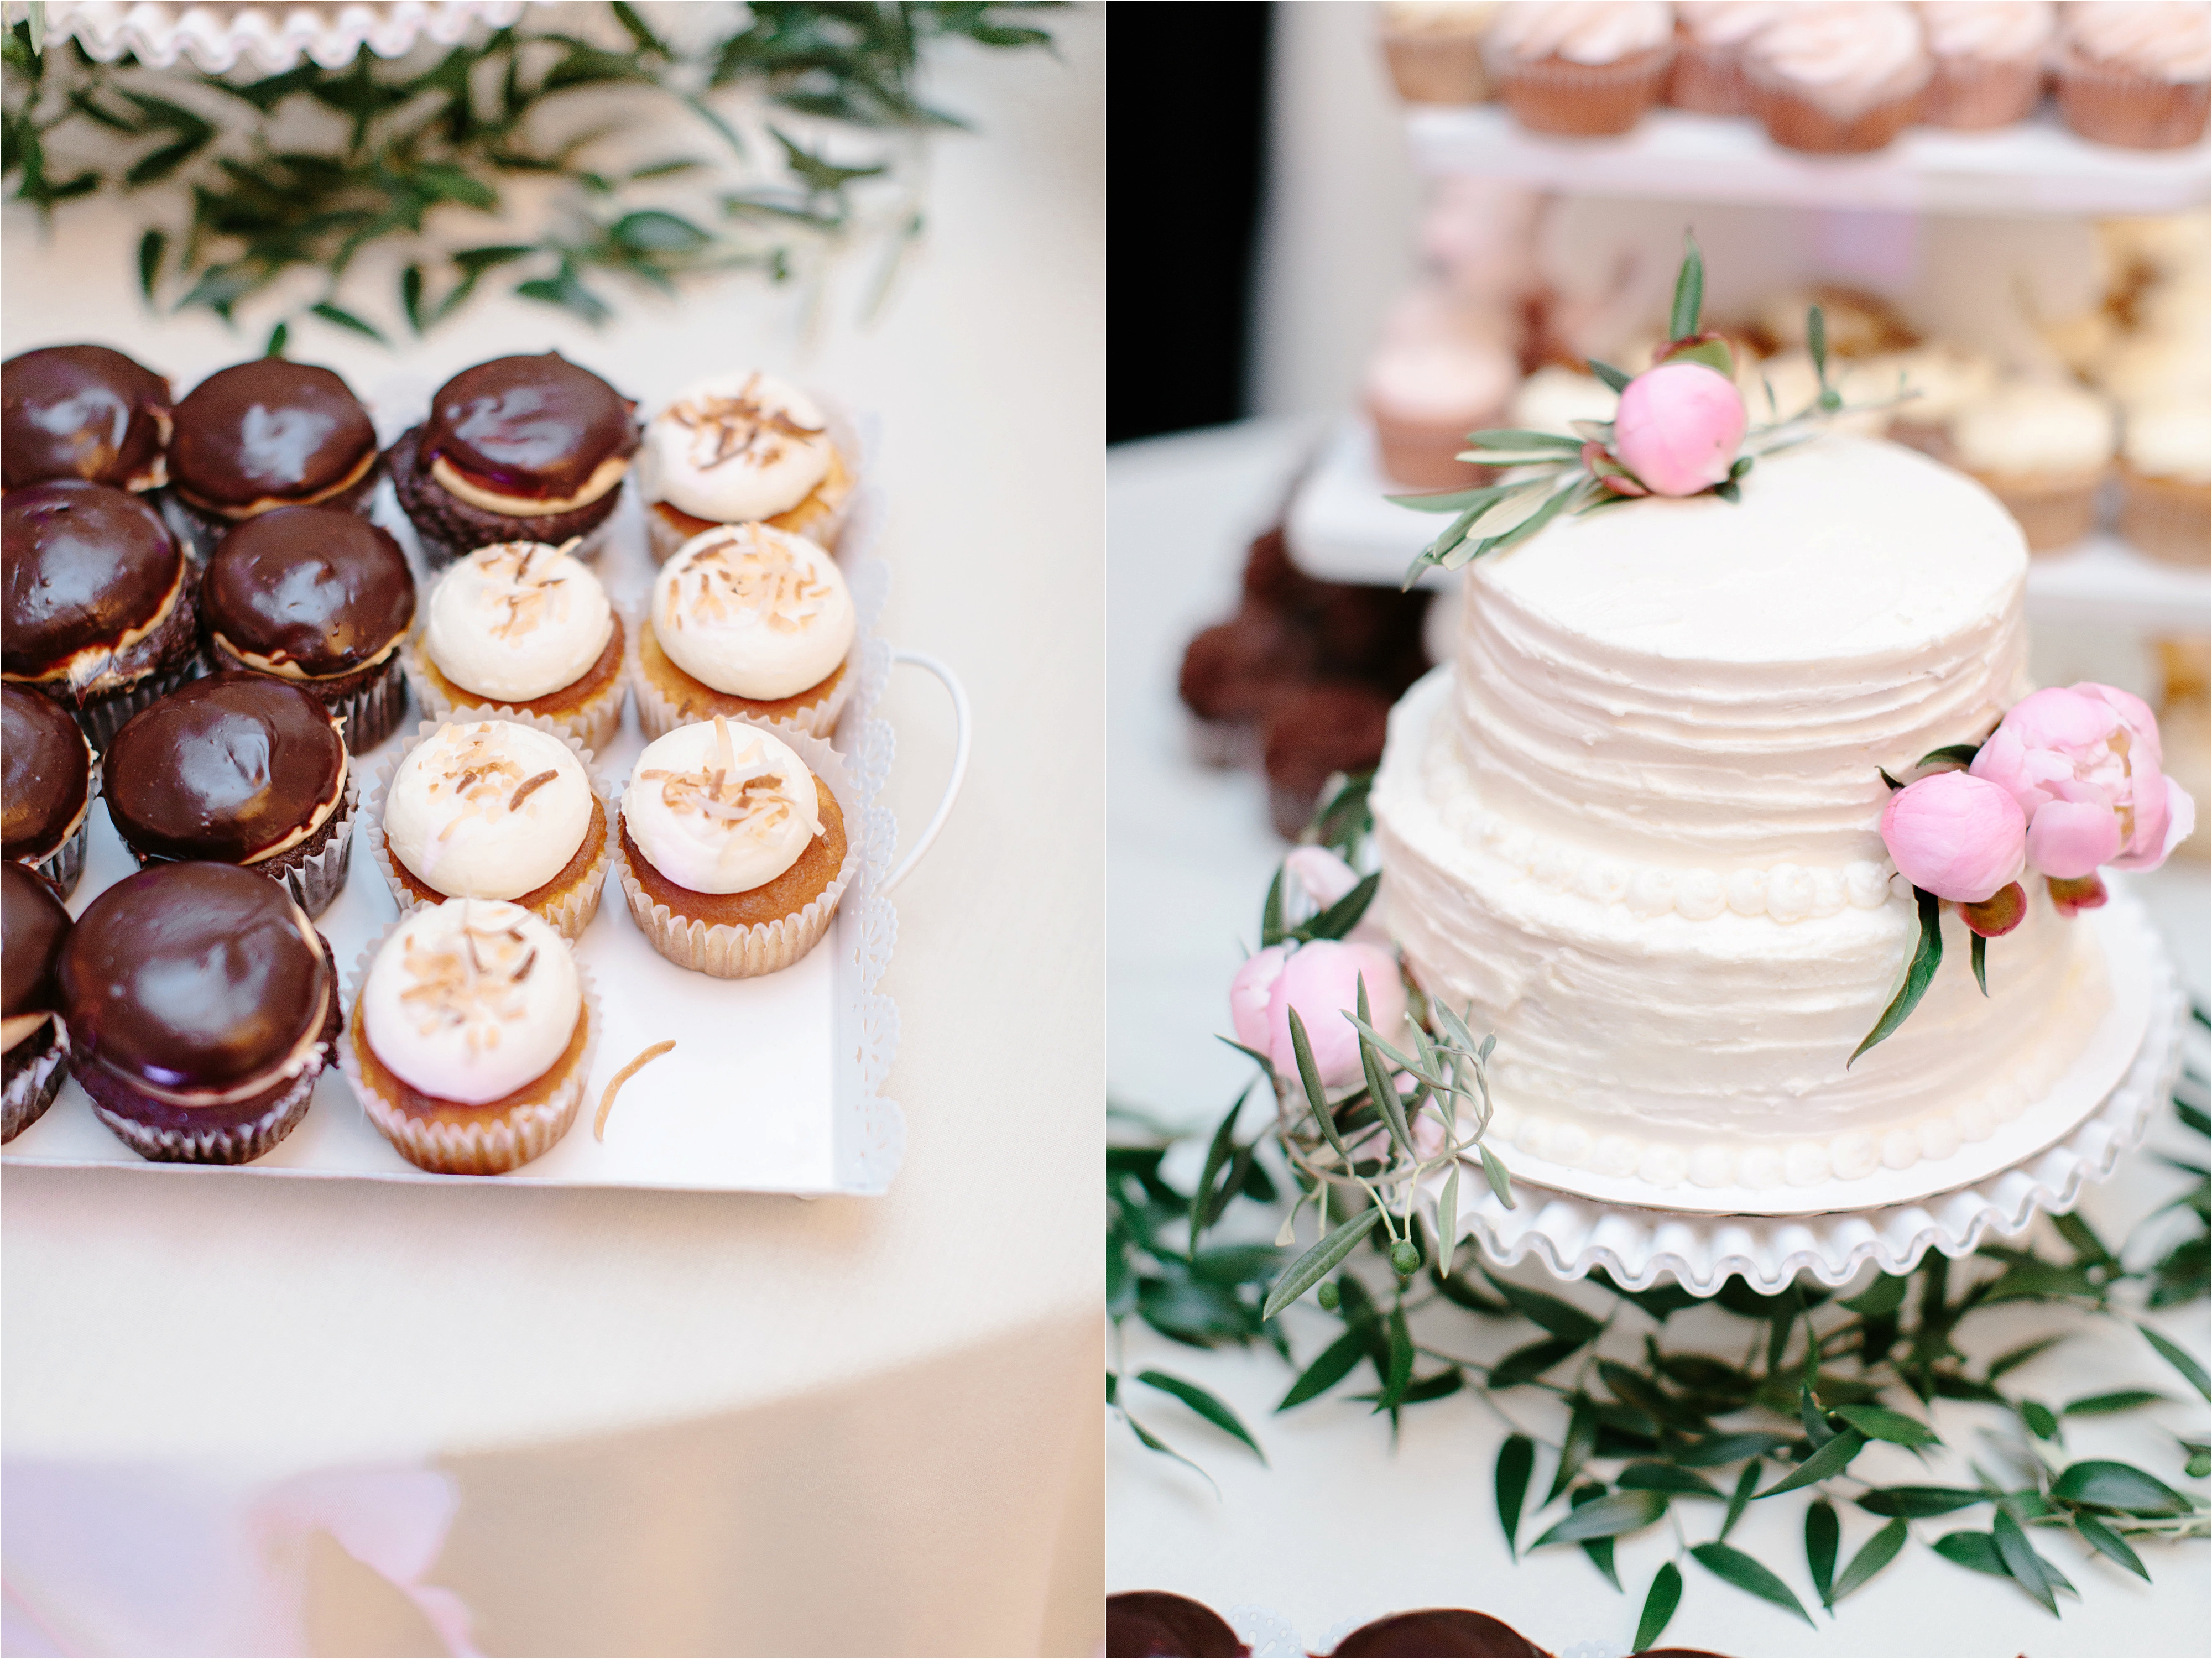 pink and white wedding cake decorated with greenery